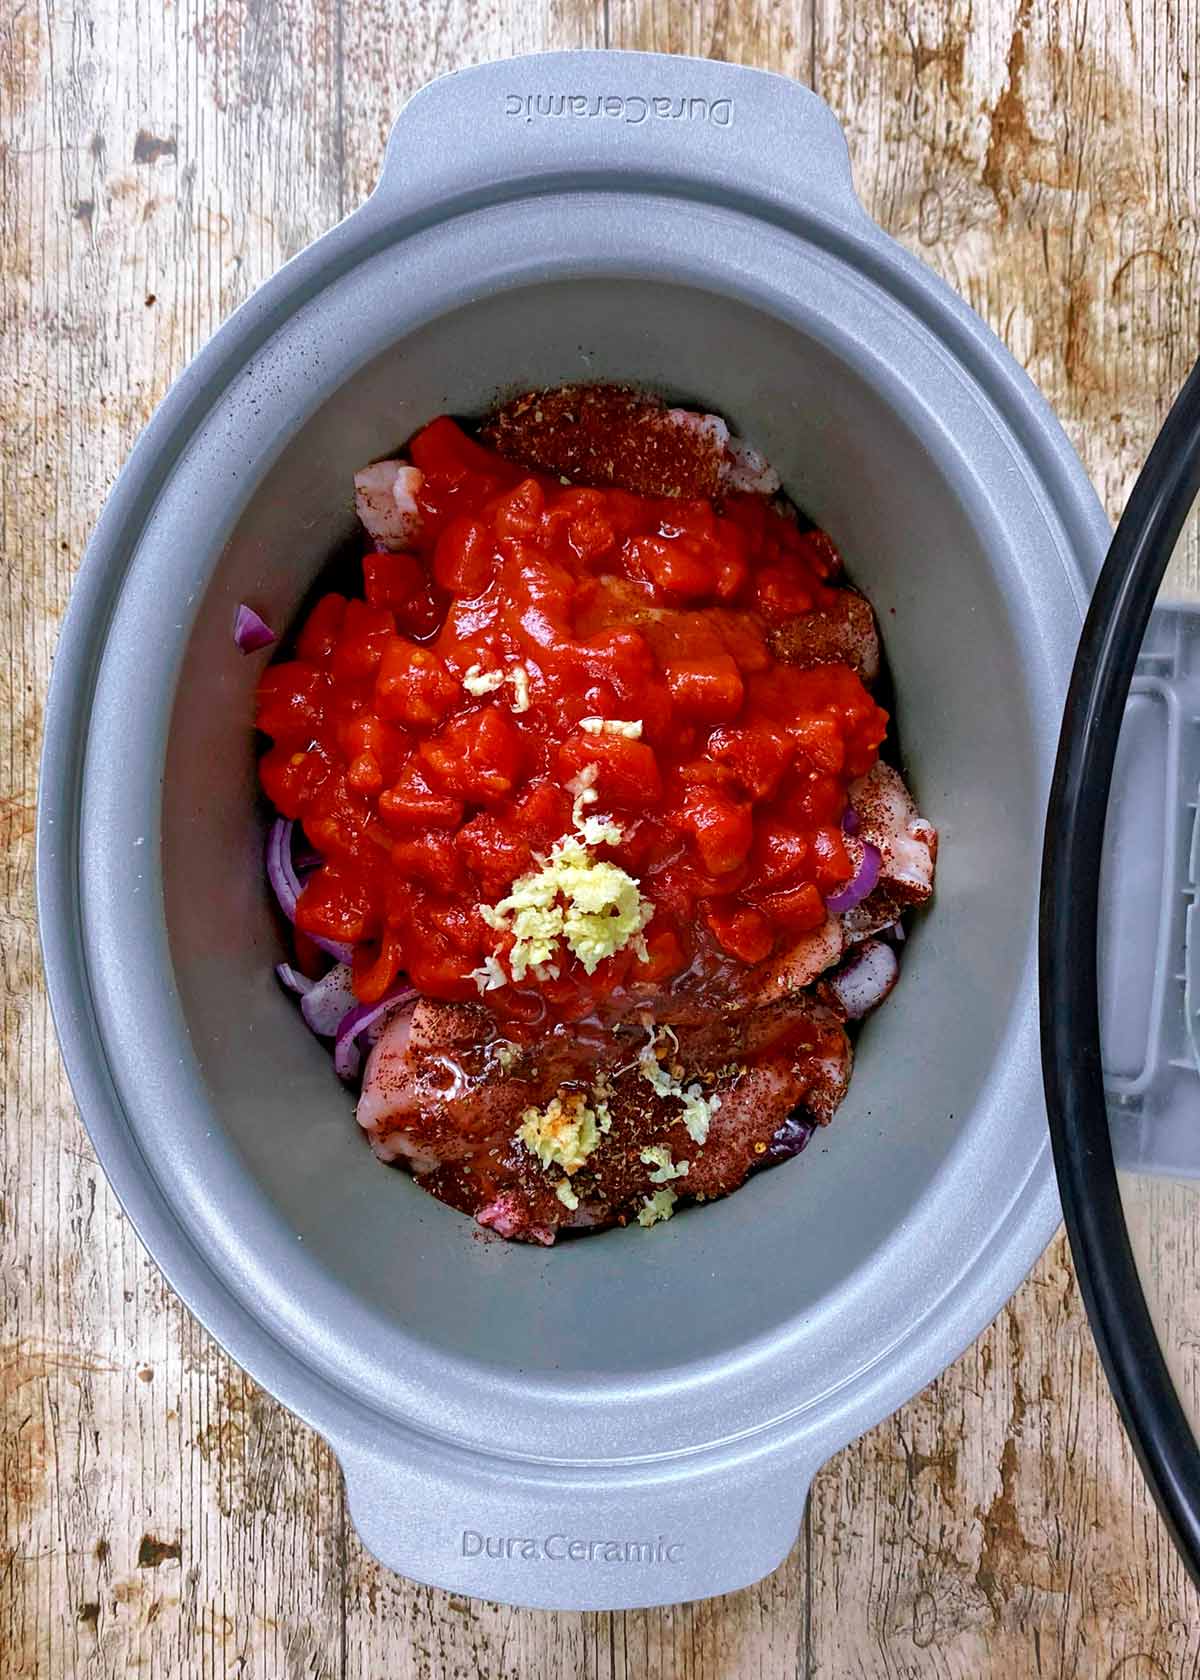 Chopped tomatoes and crushed garlic covering chicken and veg in a slow cooker.